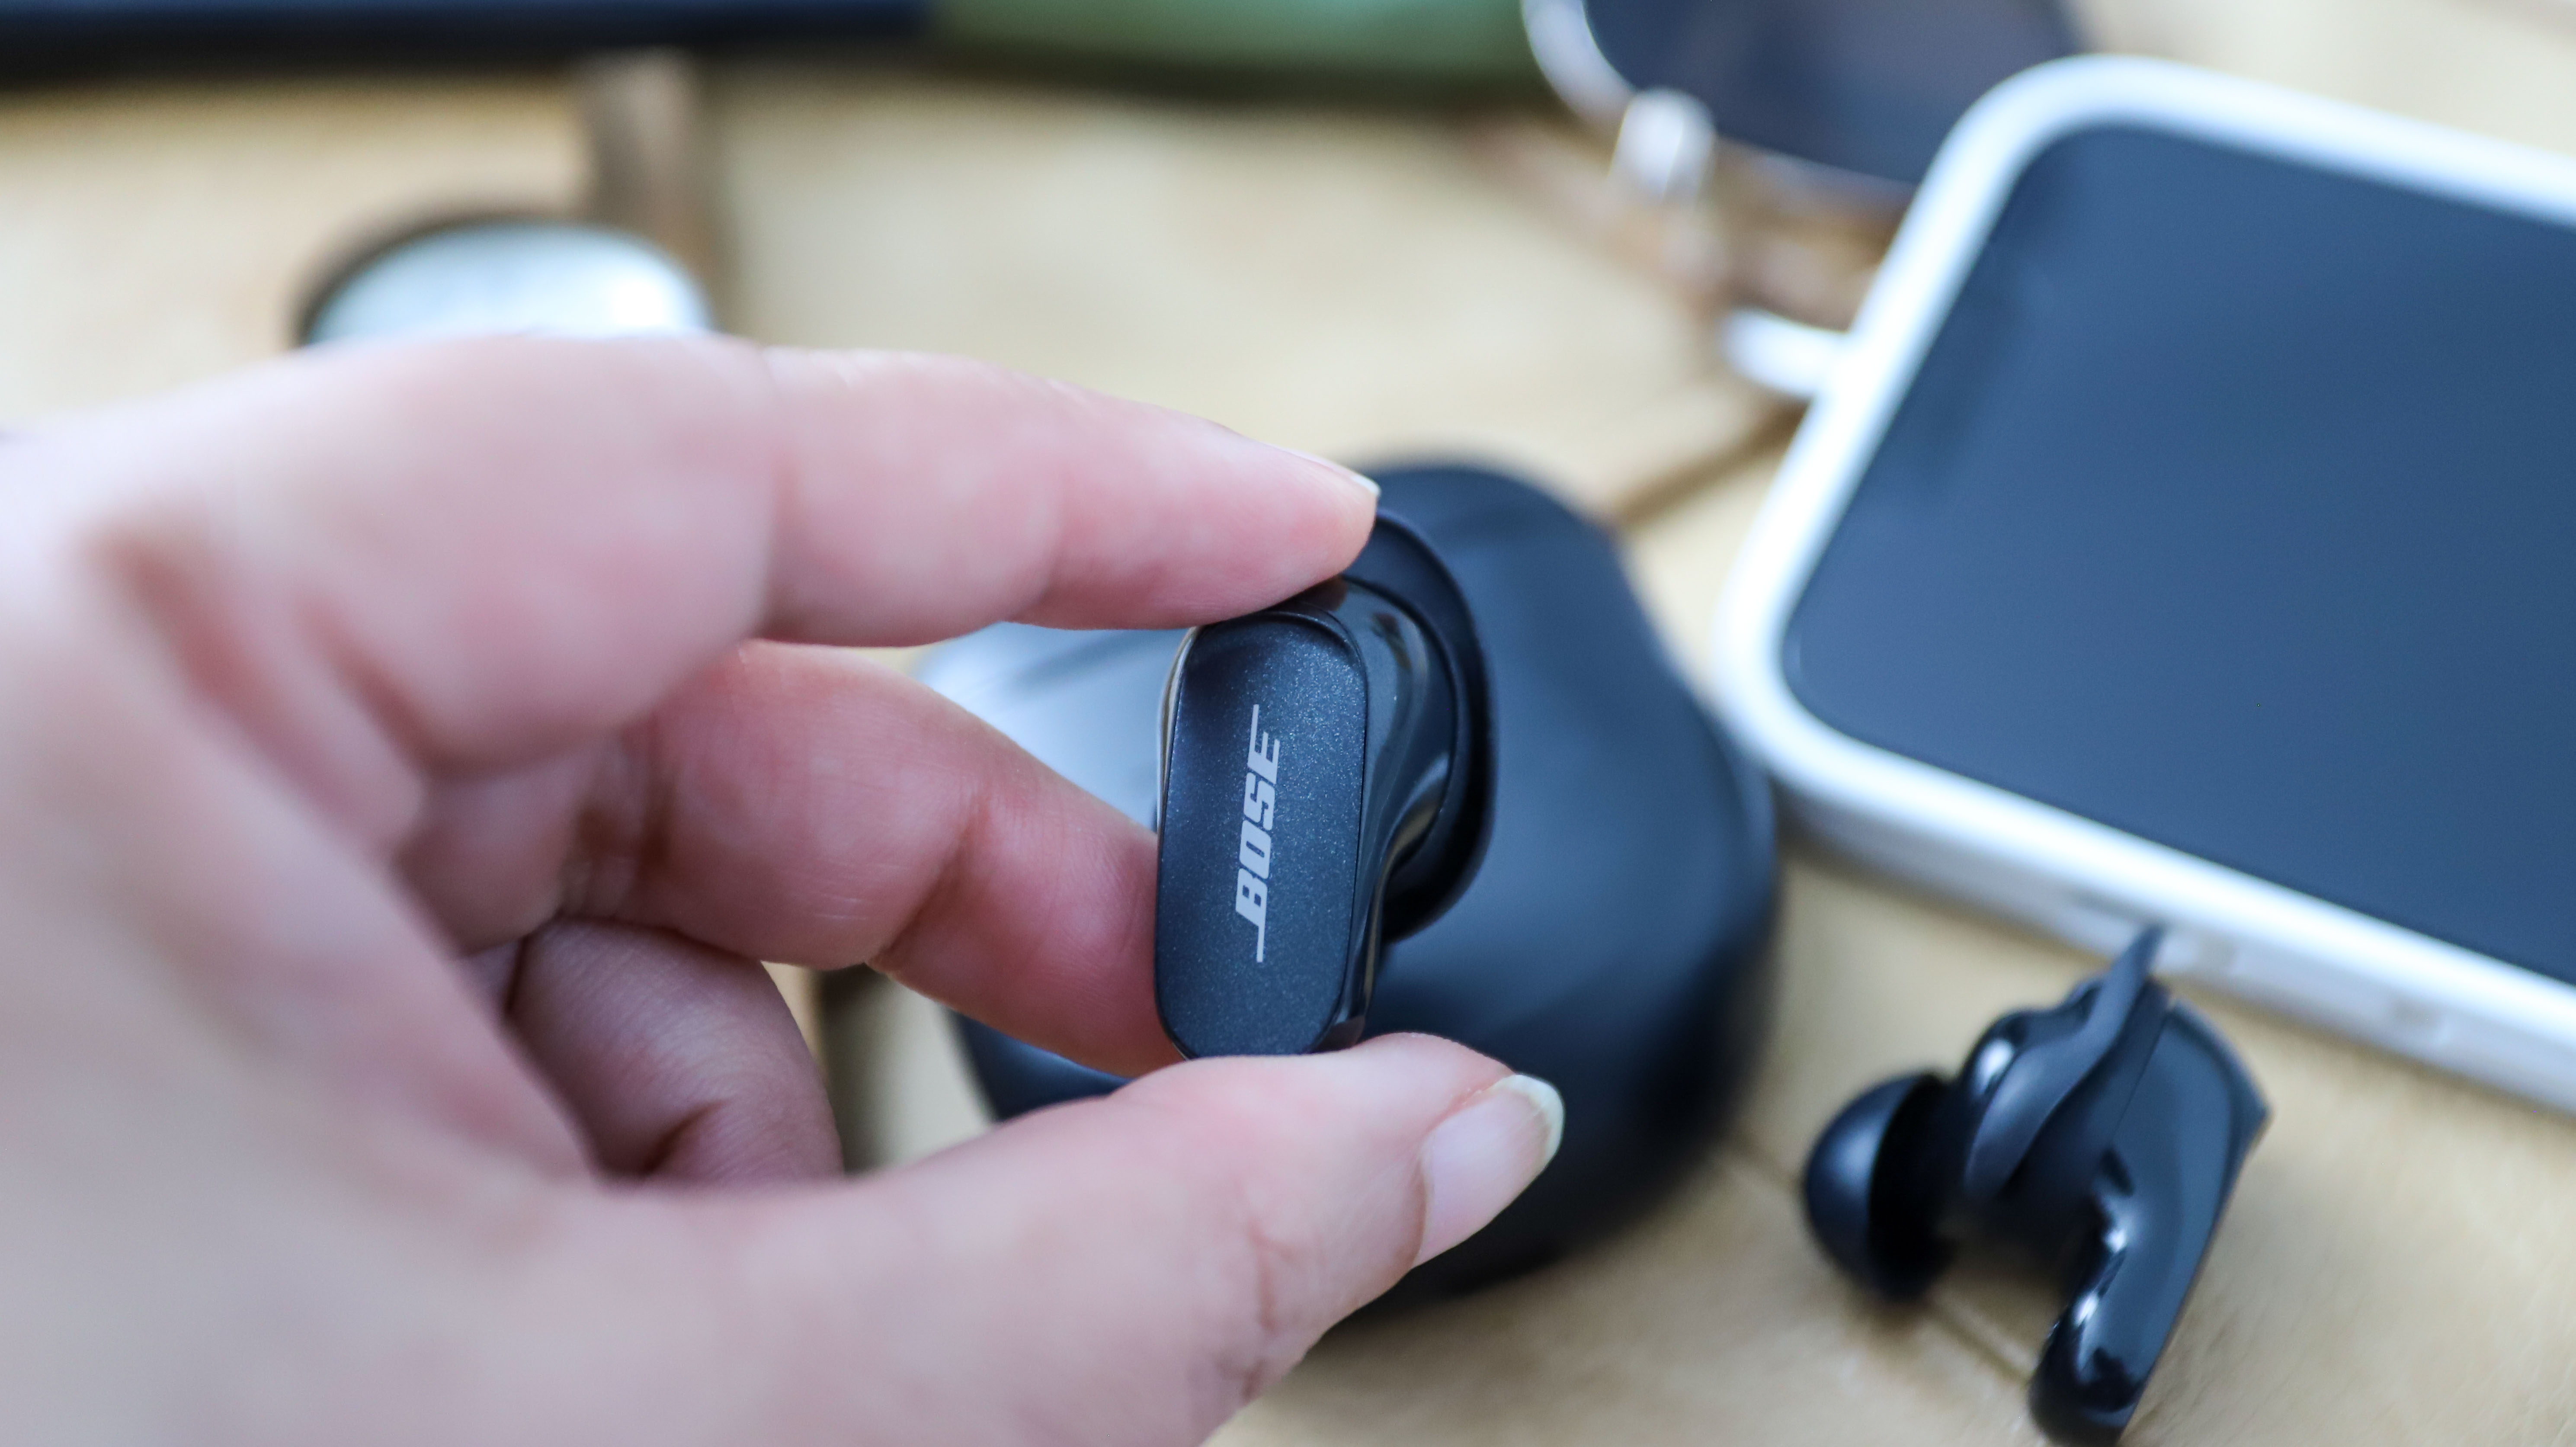 Branding on the stem of a Bose QuietComfort Earbuds 2